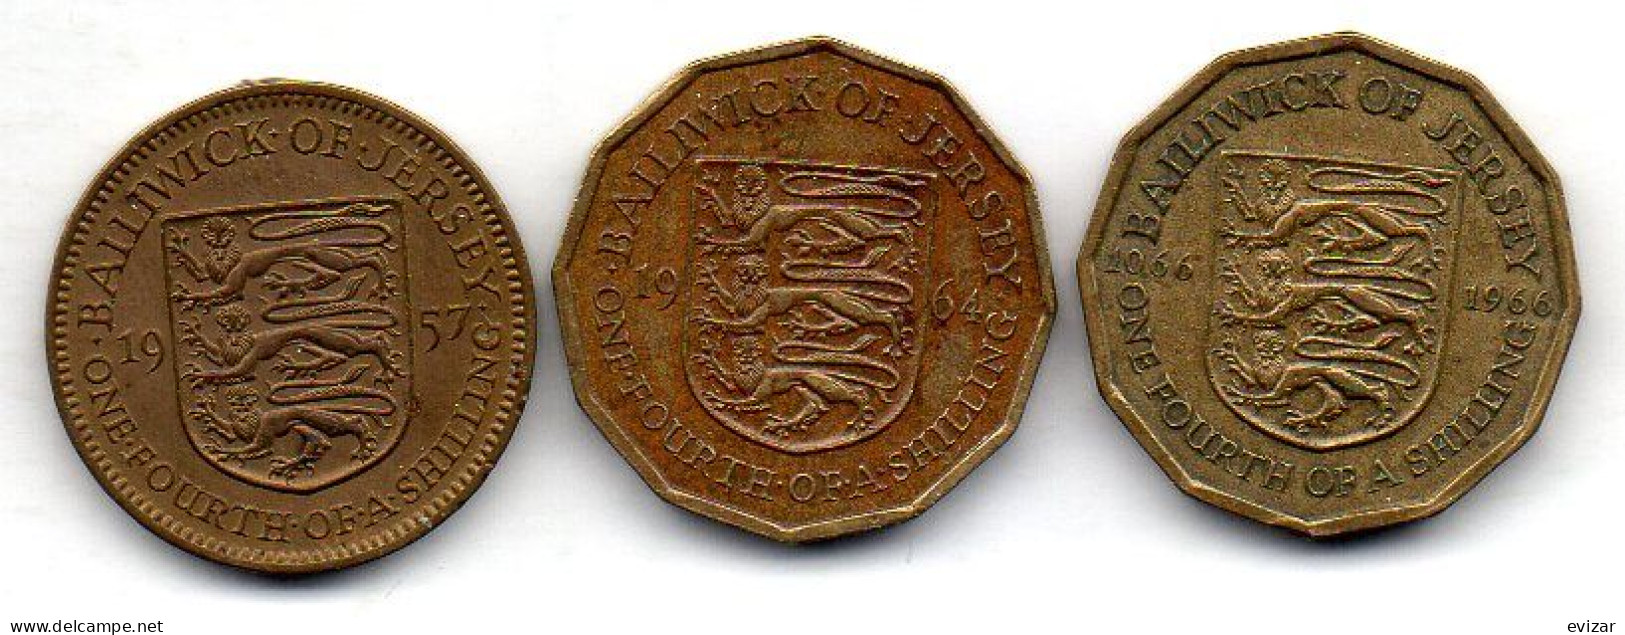 JERSEY, Set Of Three Coins 1/4 Shilling, Nickel-Brass, Year 1957-66, KM # 22, 25,, 27 - Jersey